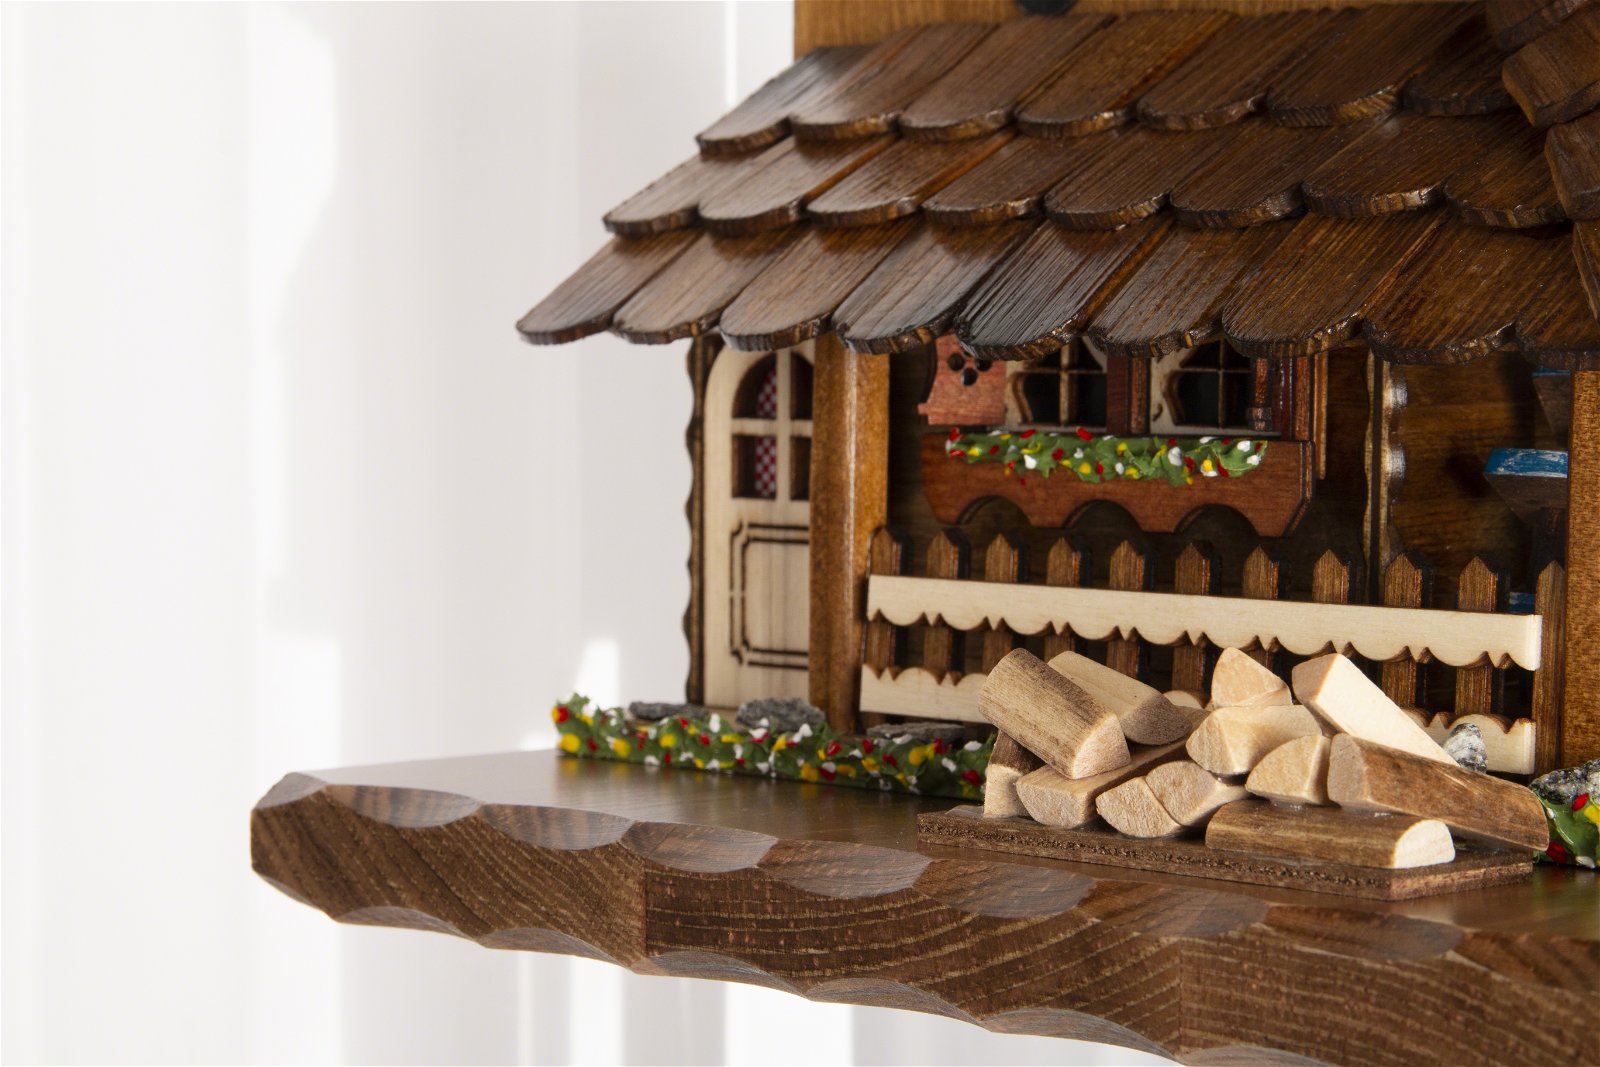 Cuckoo Clock Chalet Style 8 Day Movement 41cm by Hönes